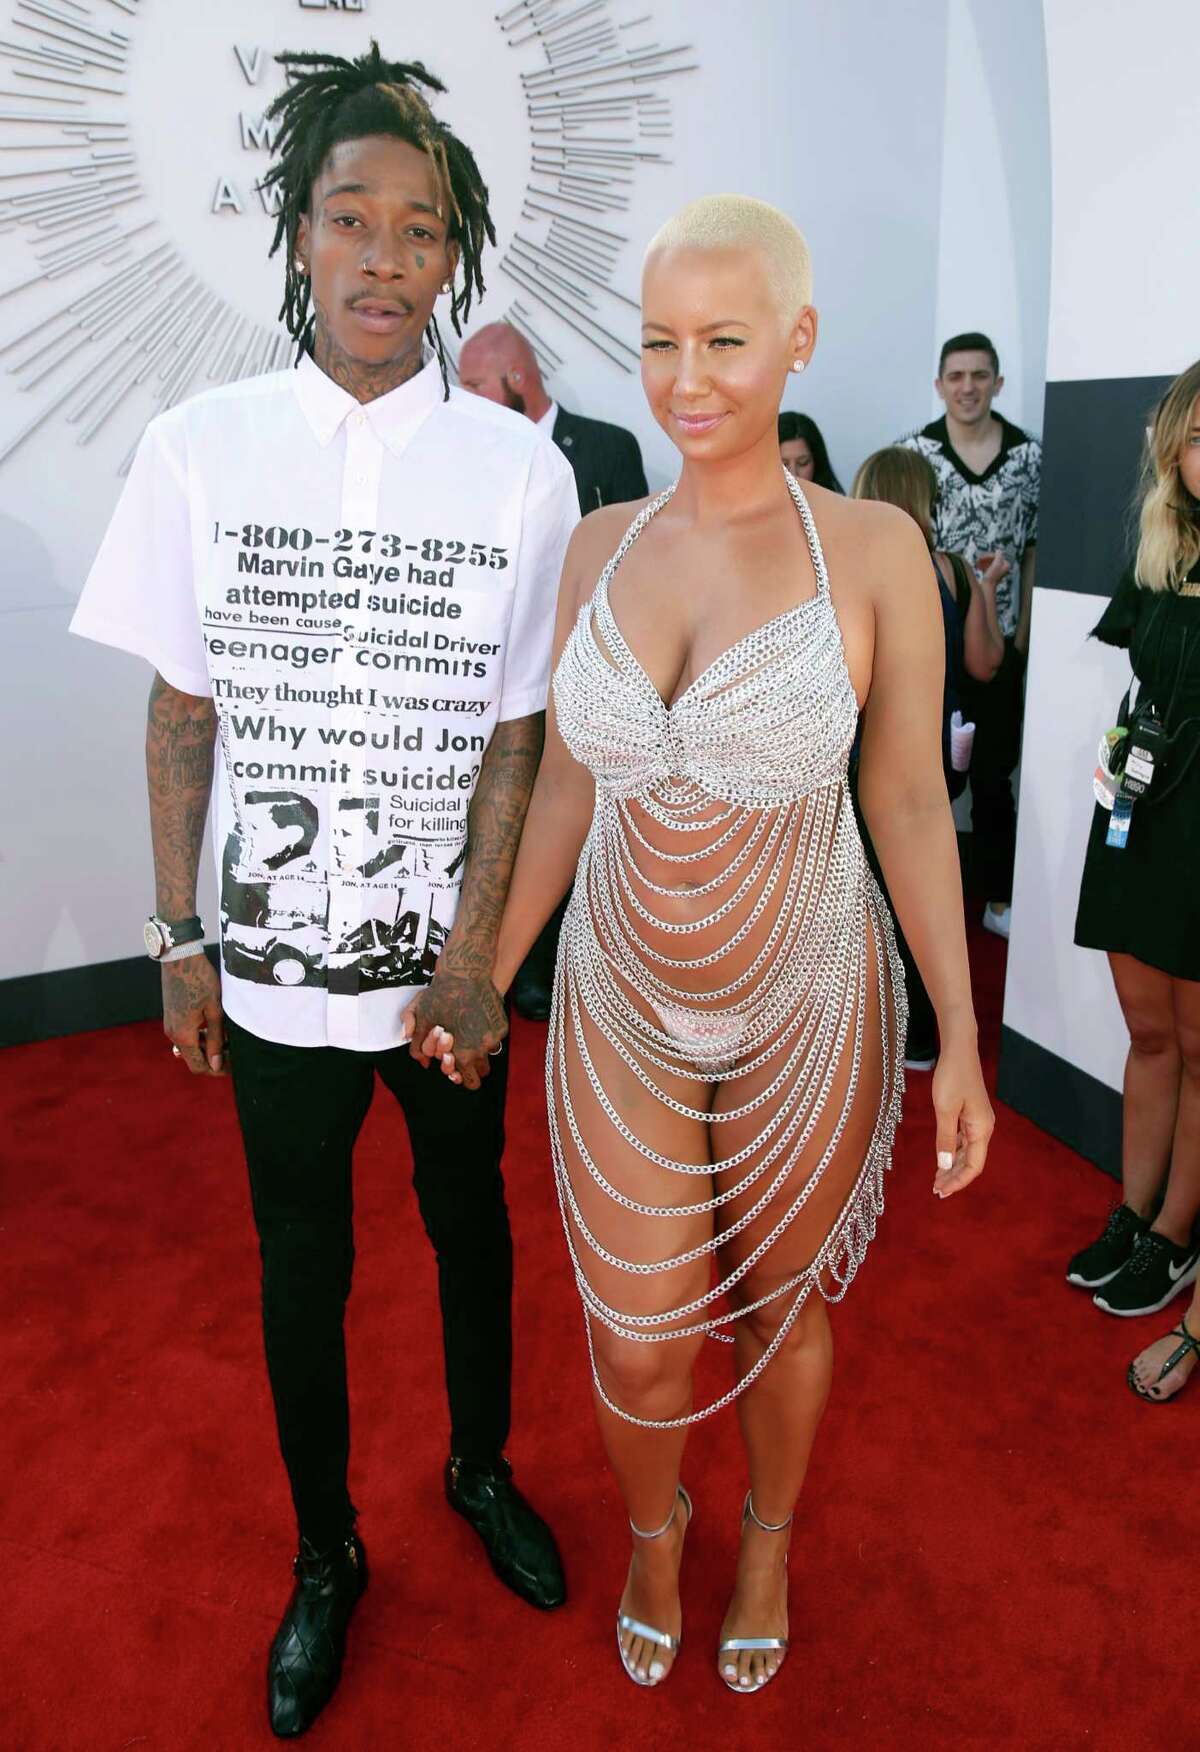 Worst Wiz Khalifa and Amber Rose - it's a sad day when a man with a face tattoo outdoes you on the red carpet.